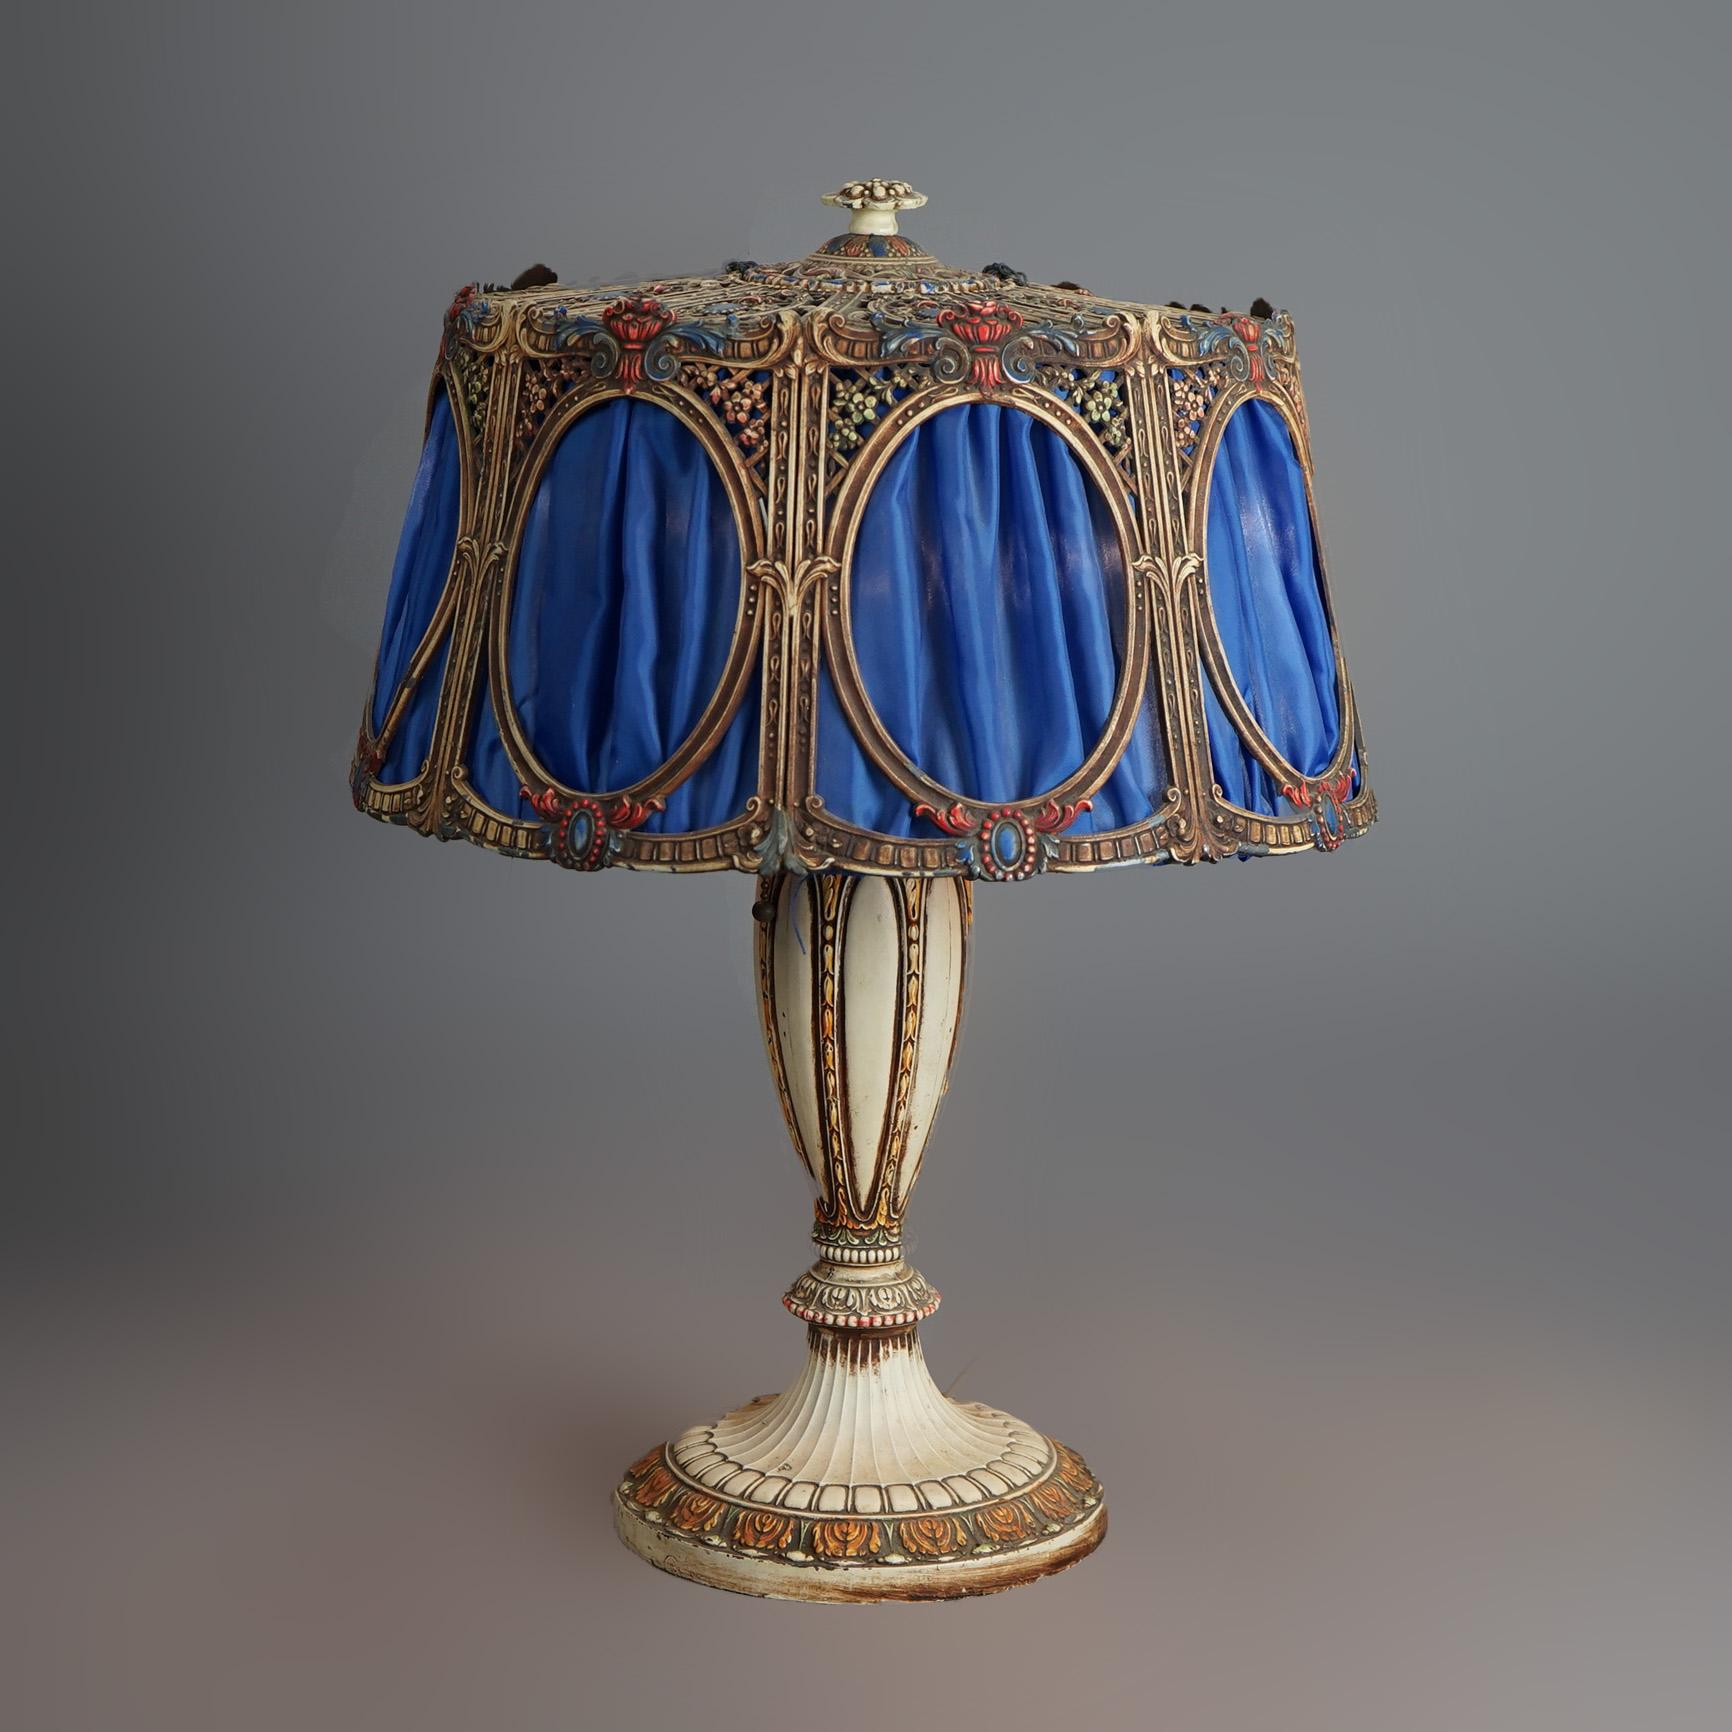 An antique Arts & Crafts table lamp by Bradley and Hubbard offers polychromed cast metal shade with fabric over double socket matching base, c1925

Measures- 22''H x 16.5''W x 16.5''D

Catalogue Note: Ask about DISCOUNTED DELIVERY RATES available to